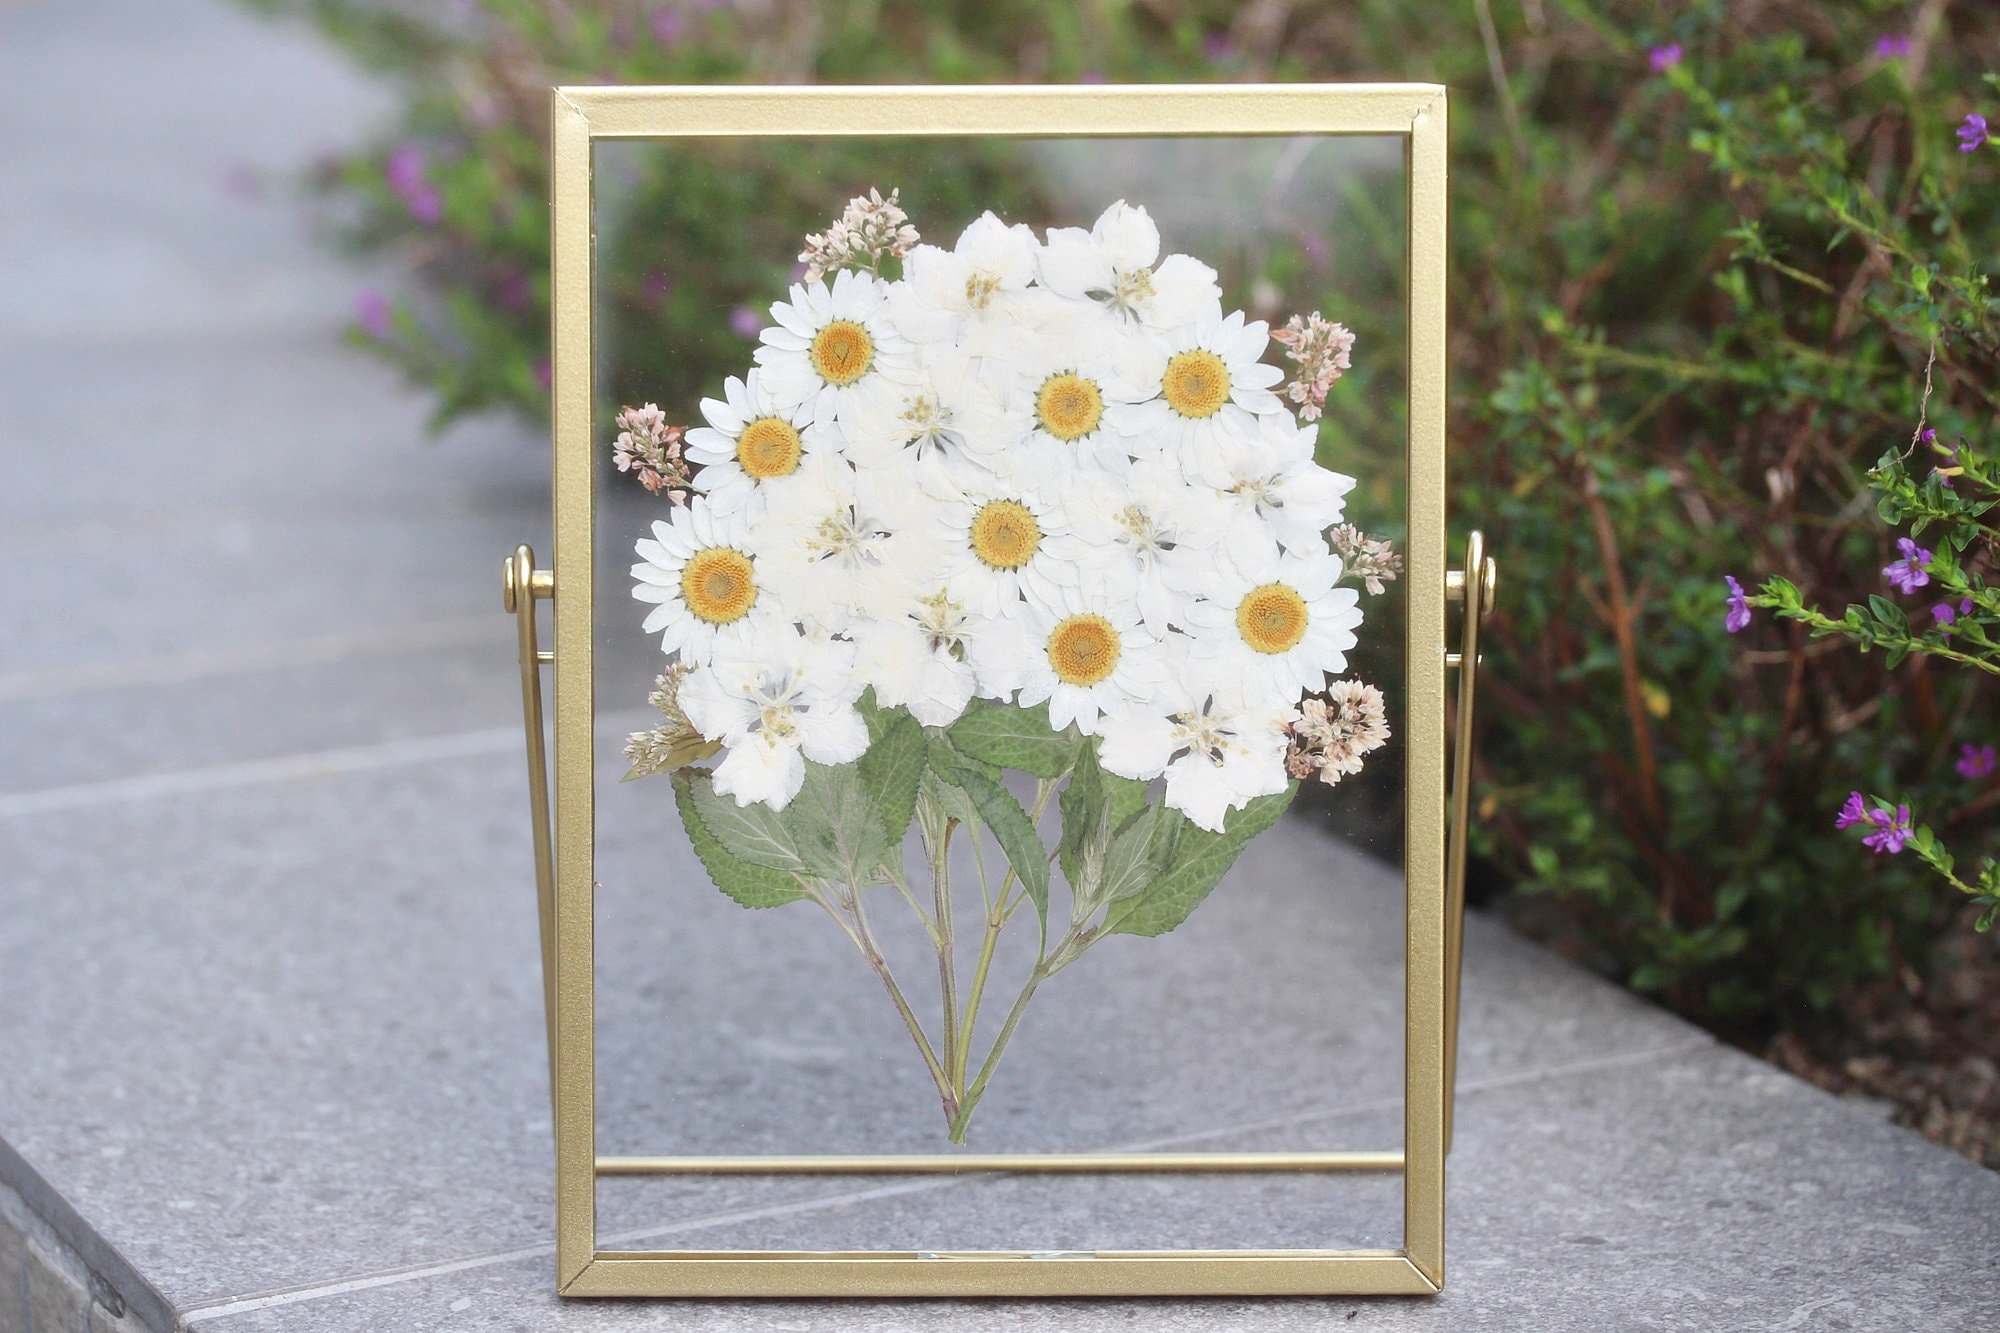 Pressed Flower Frame, Botanical Art Frame, Pressed Dried Flower Frame With  Crystal Clear Quality Acrylic Board Mixed Flower Bouquet 